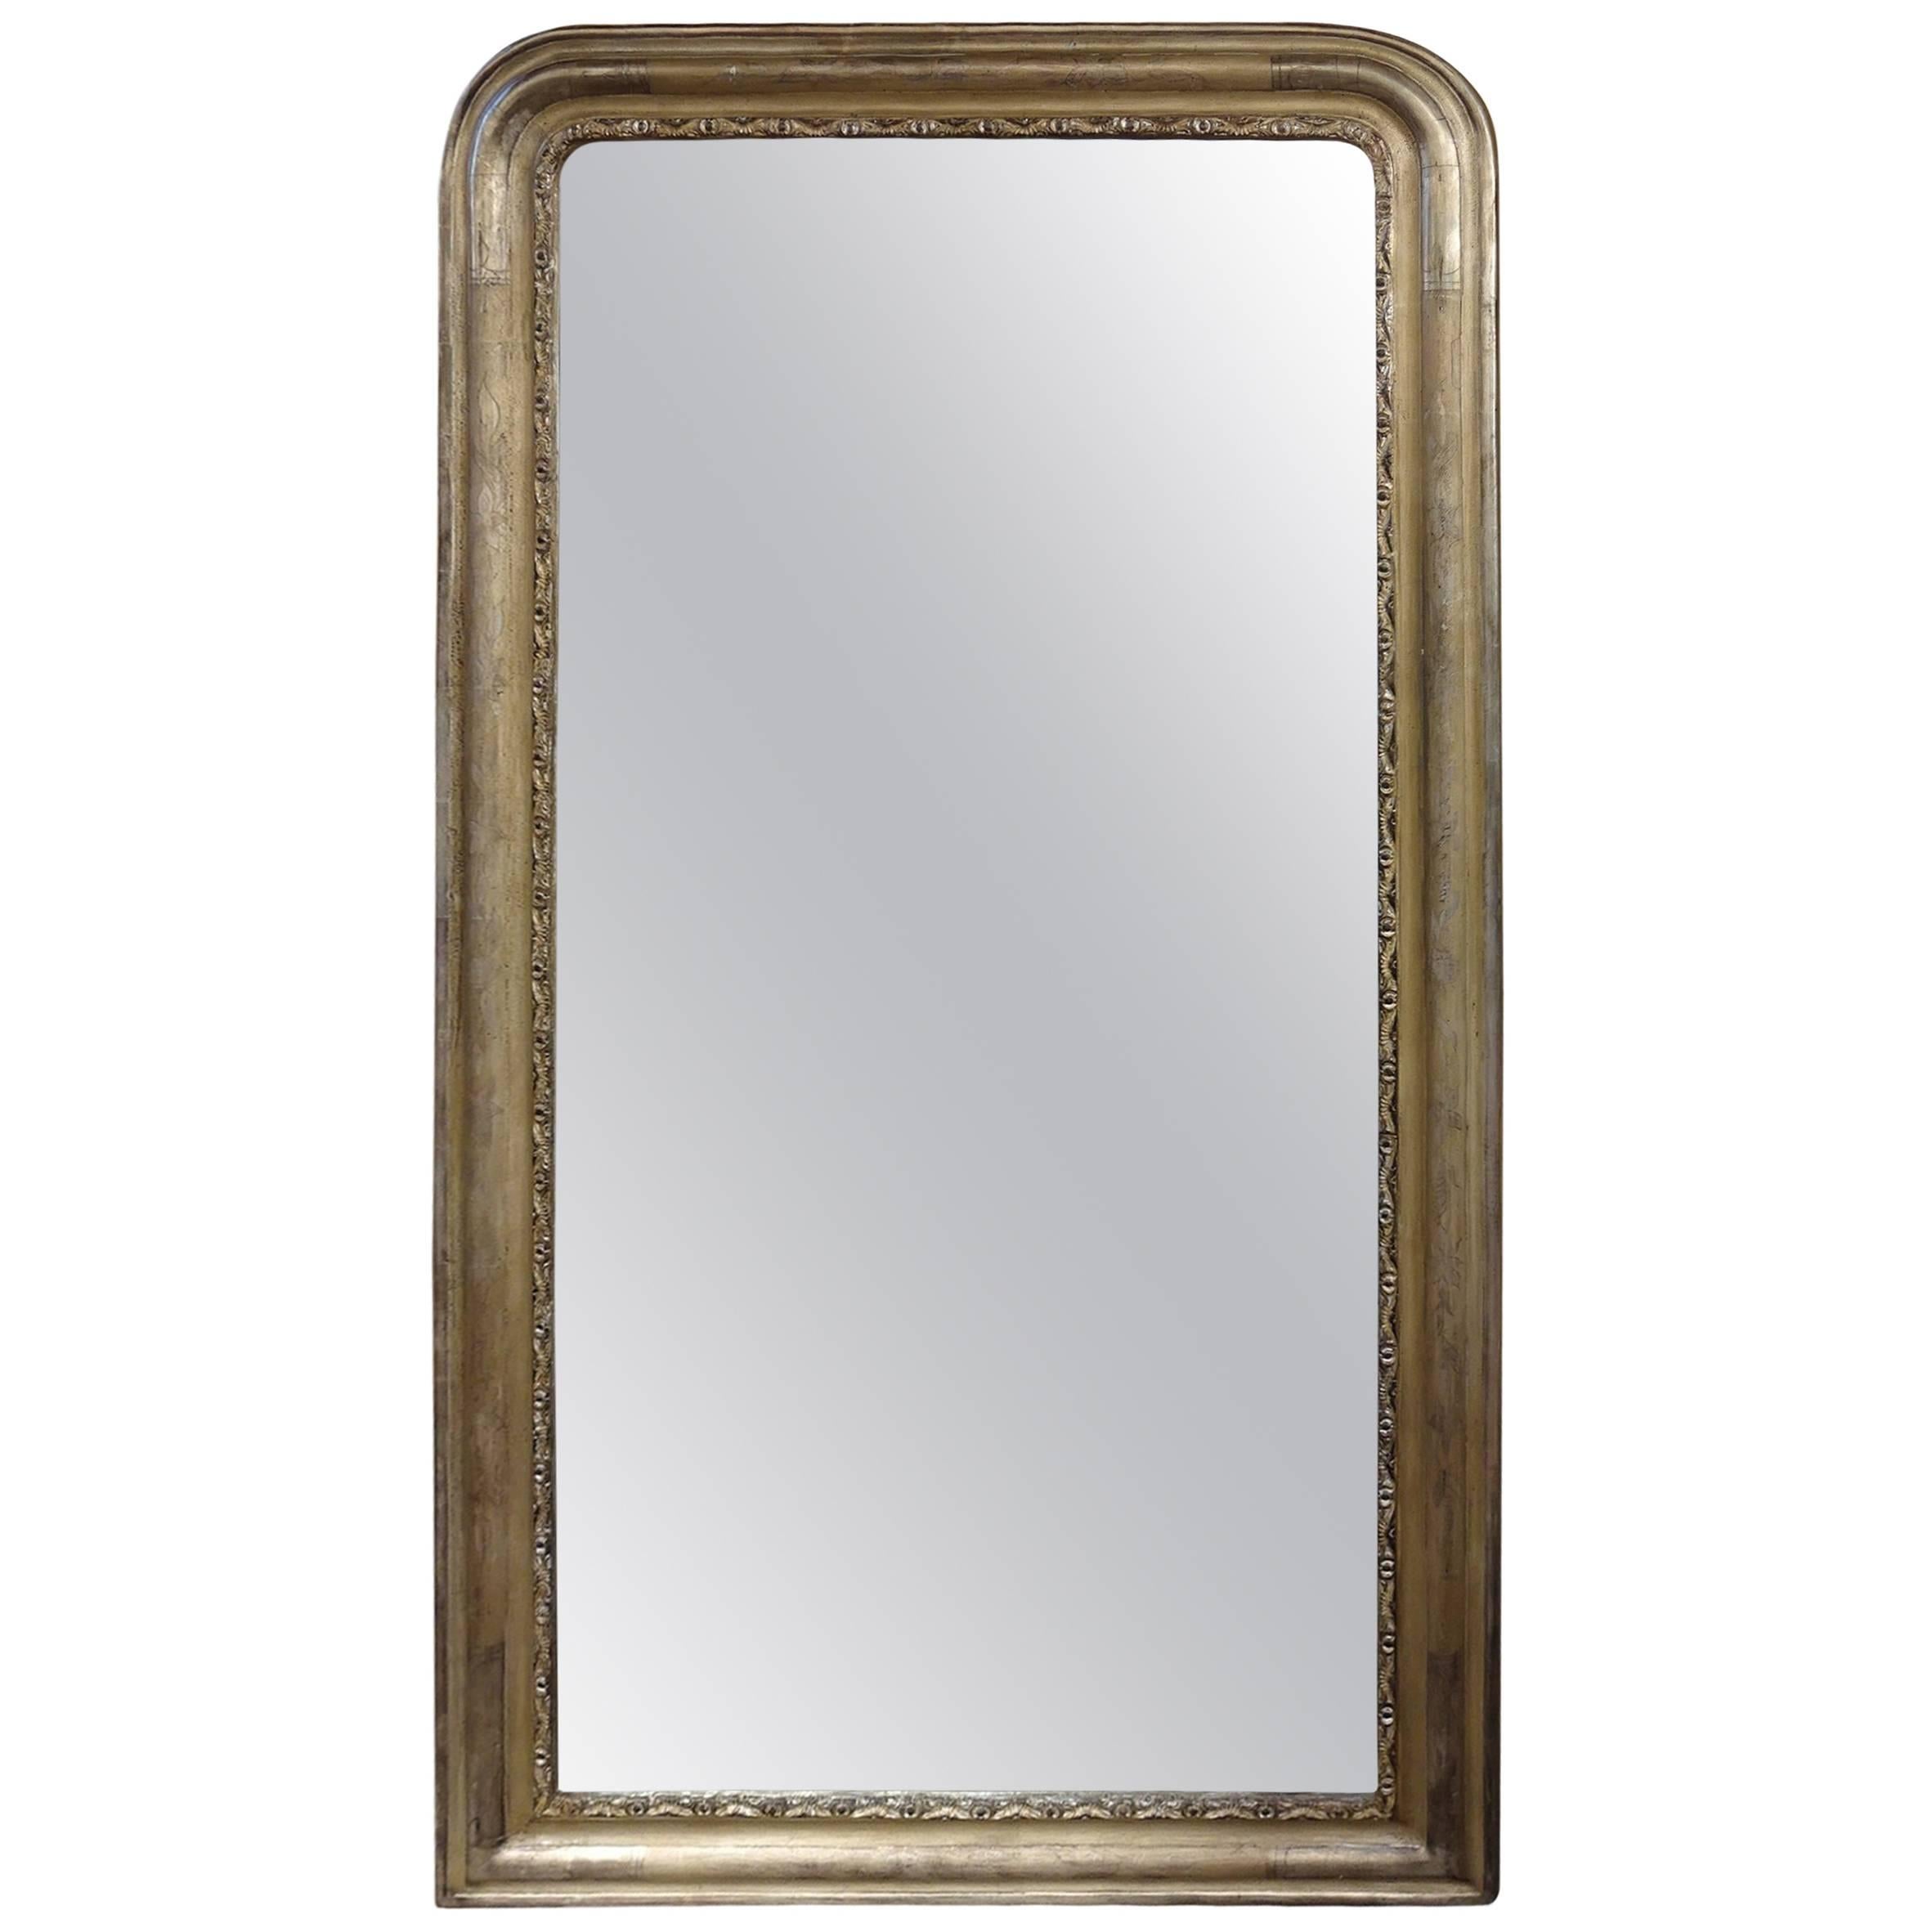 Antique French Louis Philippe Silver Mirror